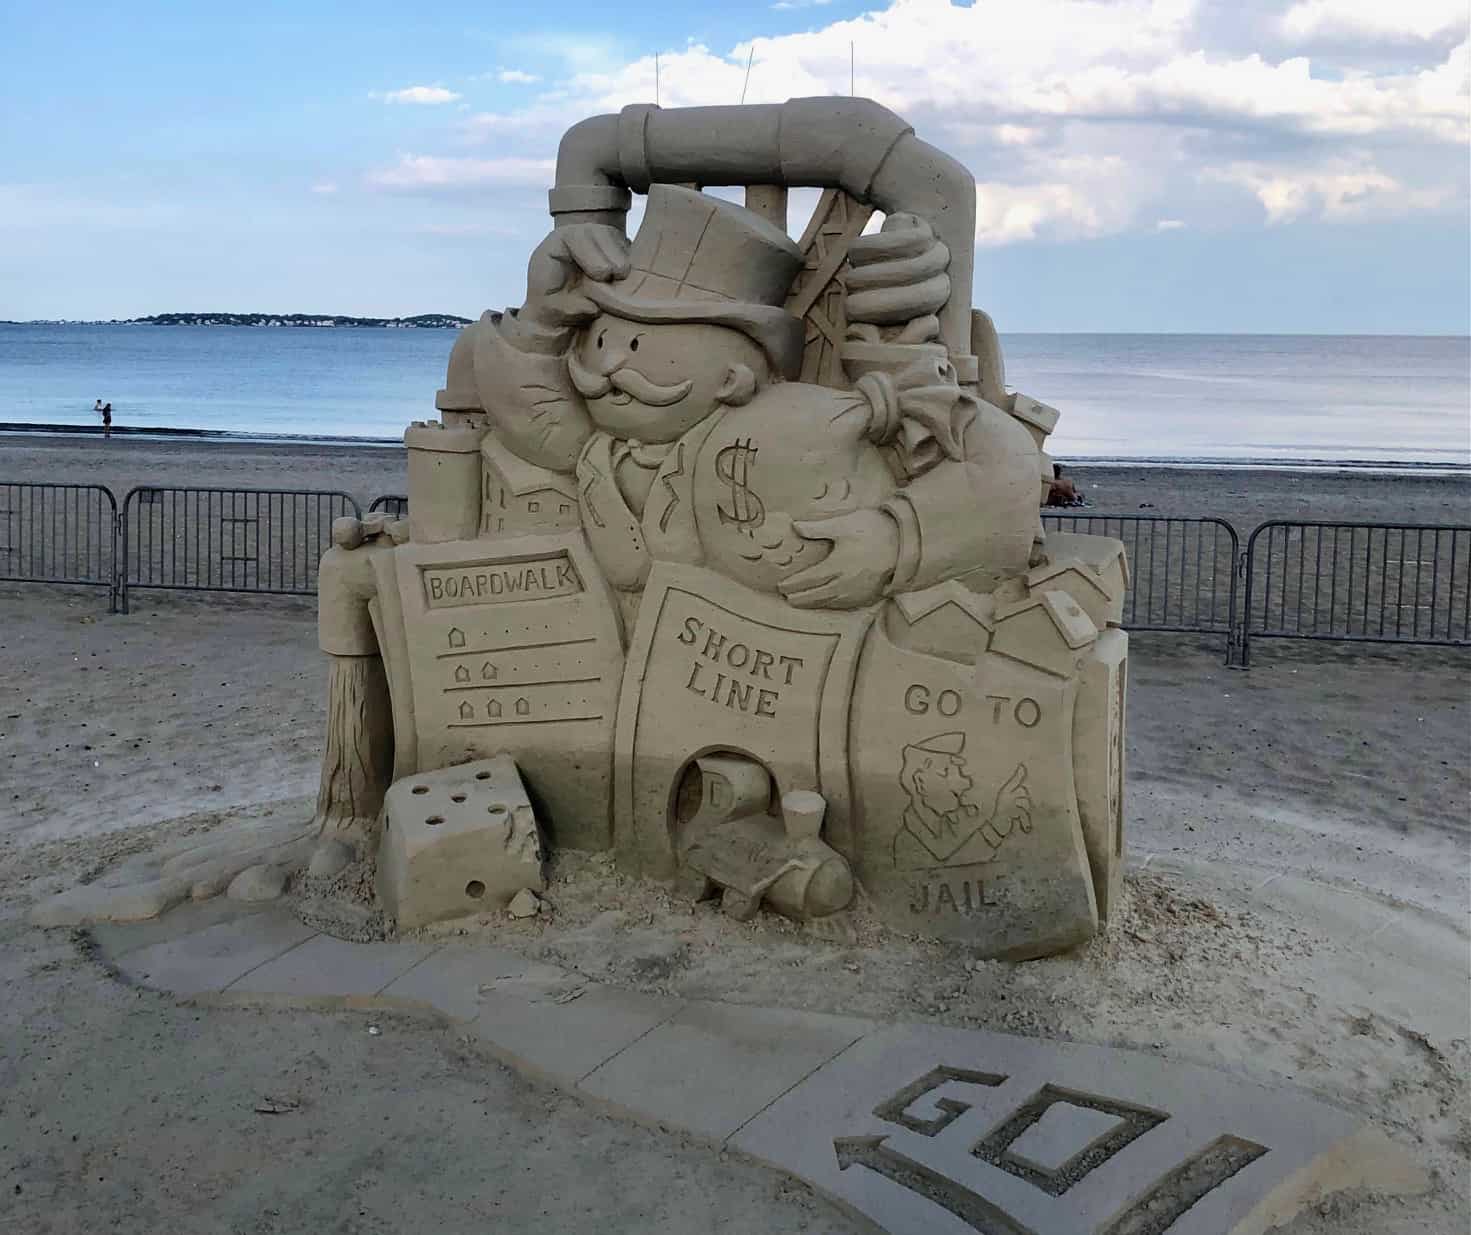 Monopoly-style sand sculpture by the water